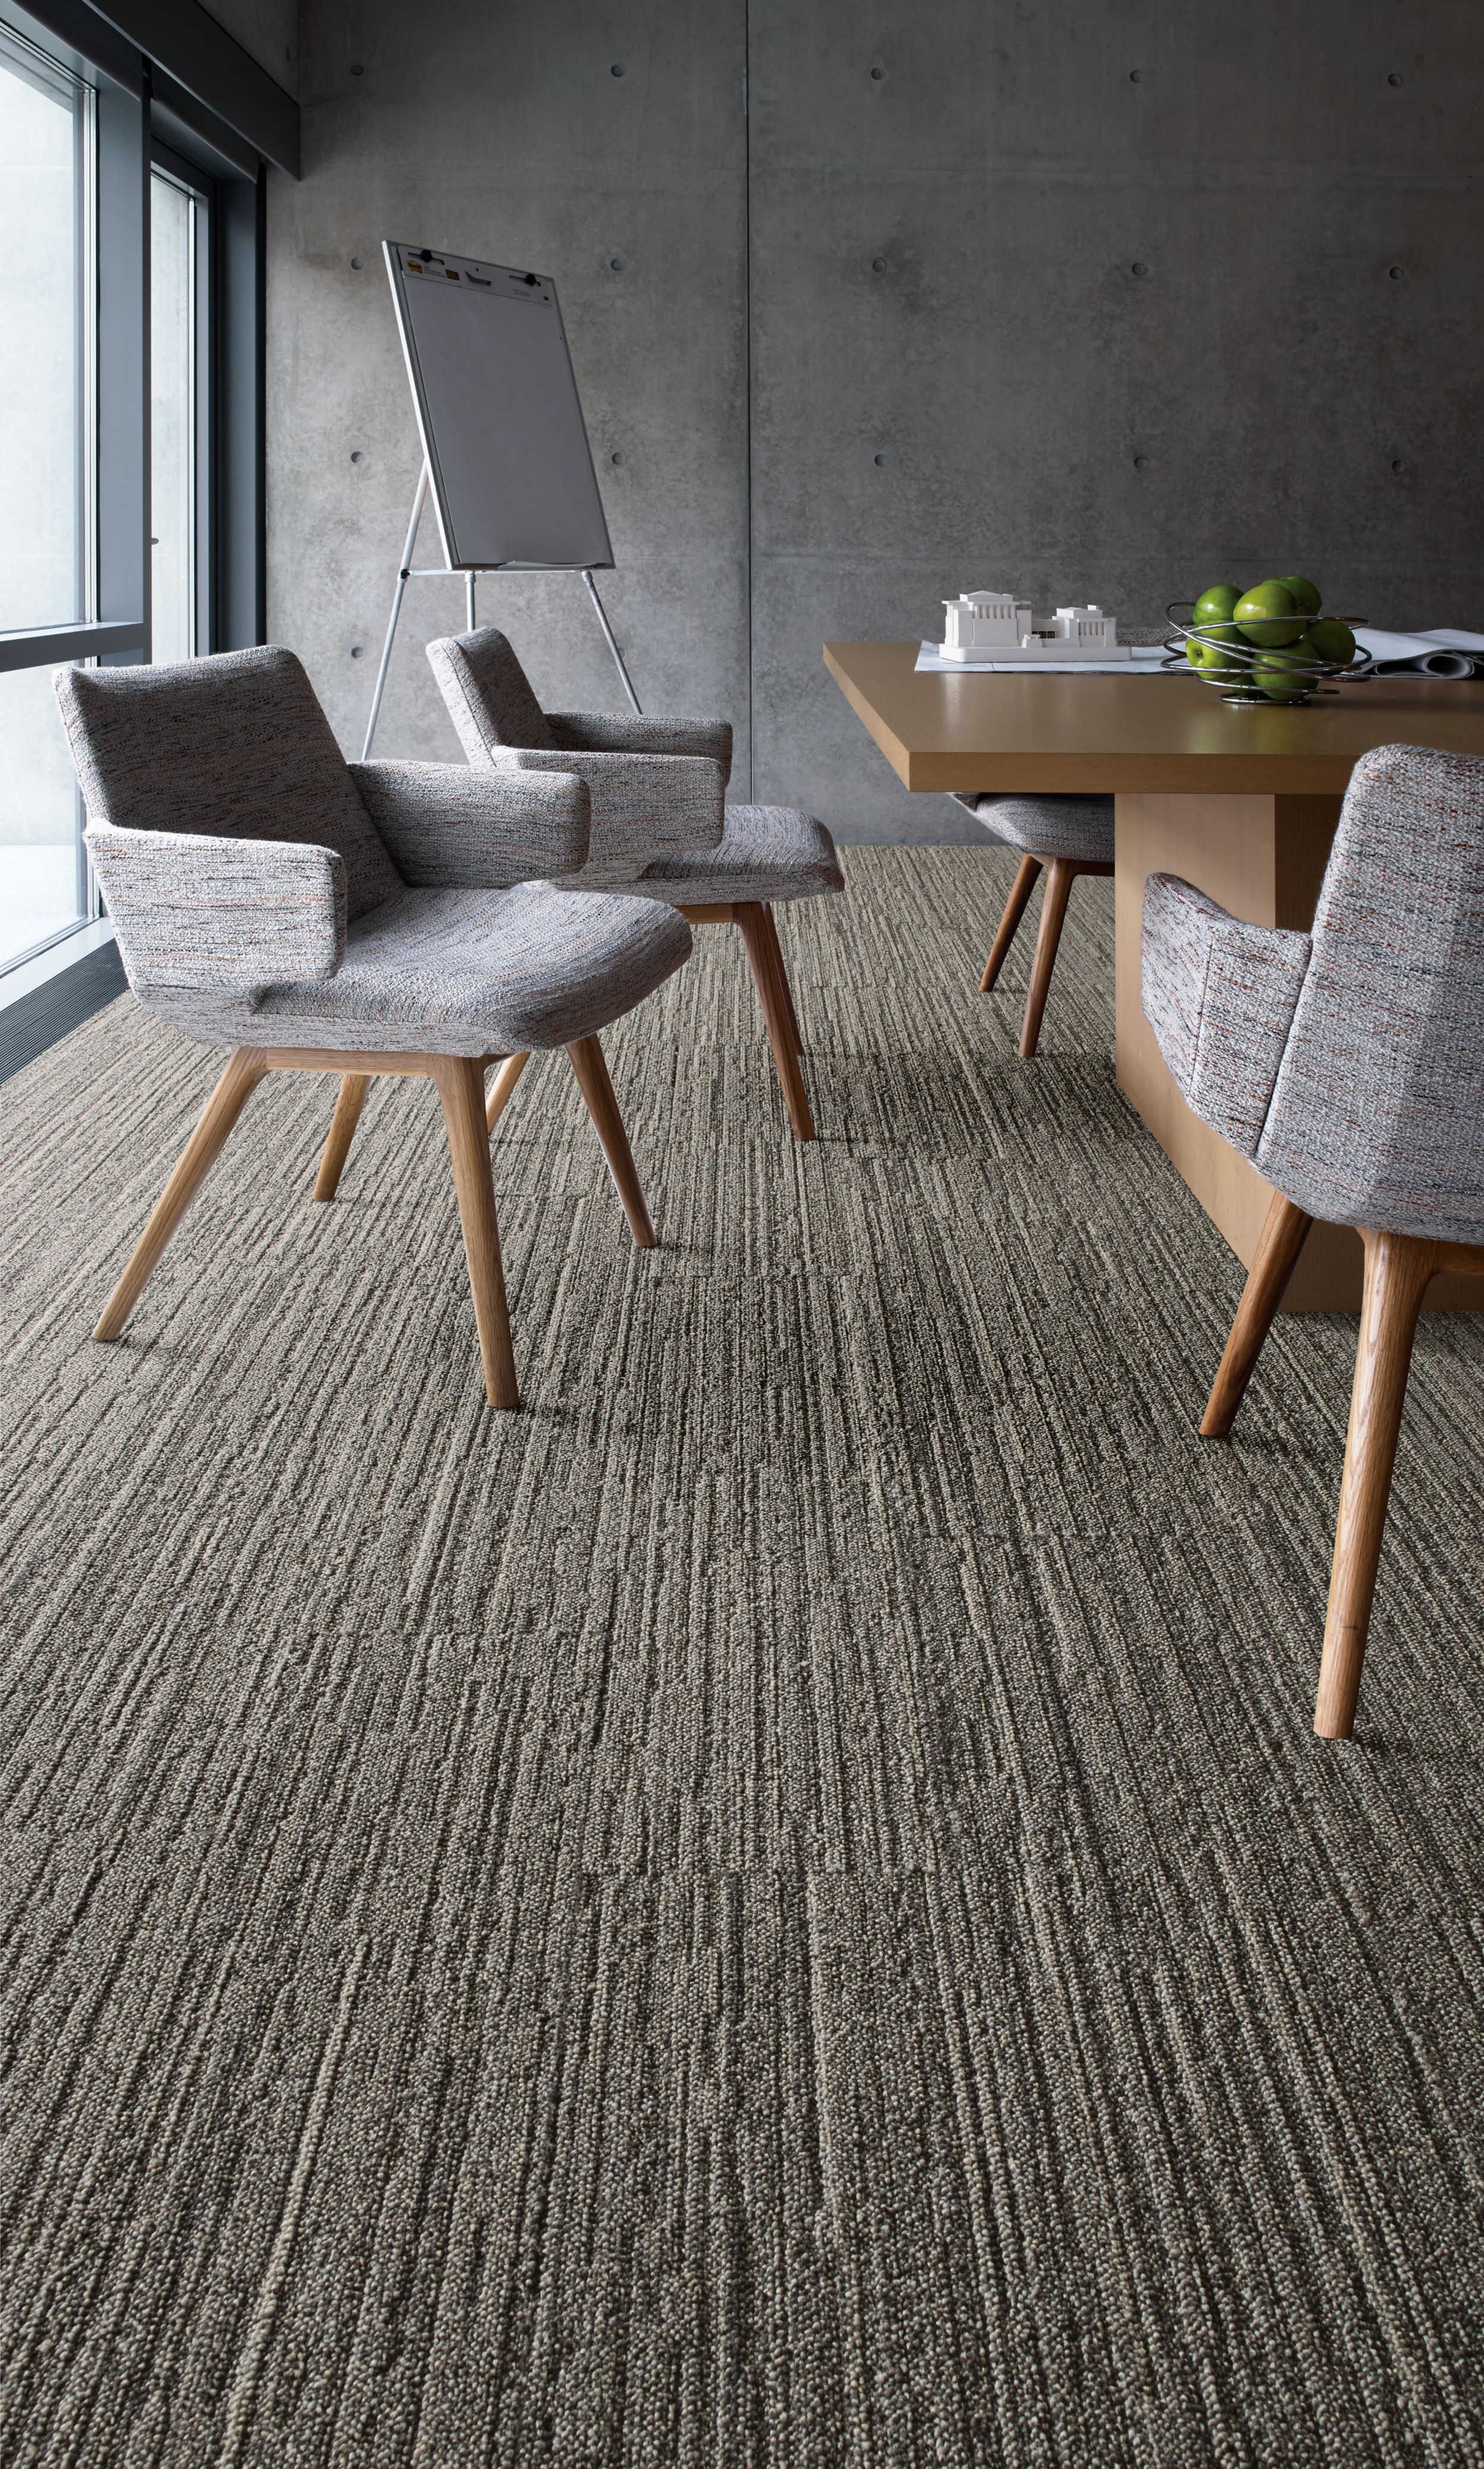 Interface WW880 plank carpet tile in meeting room with table and chairs numéro d’image 5